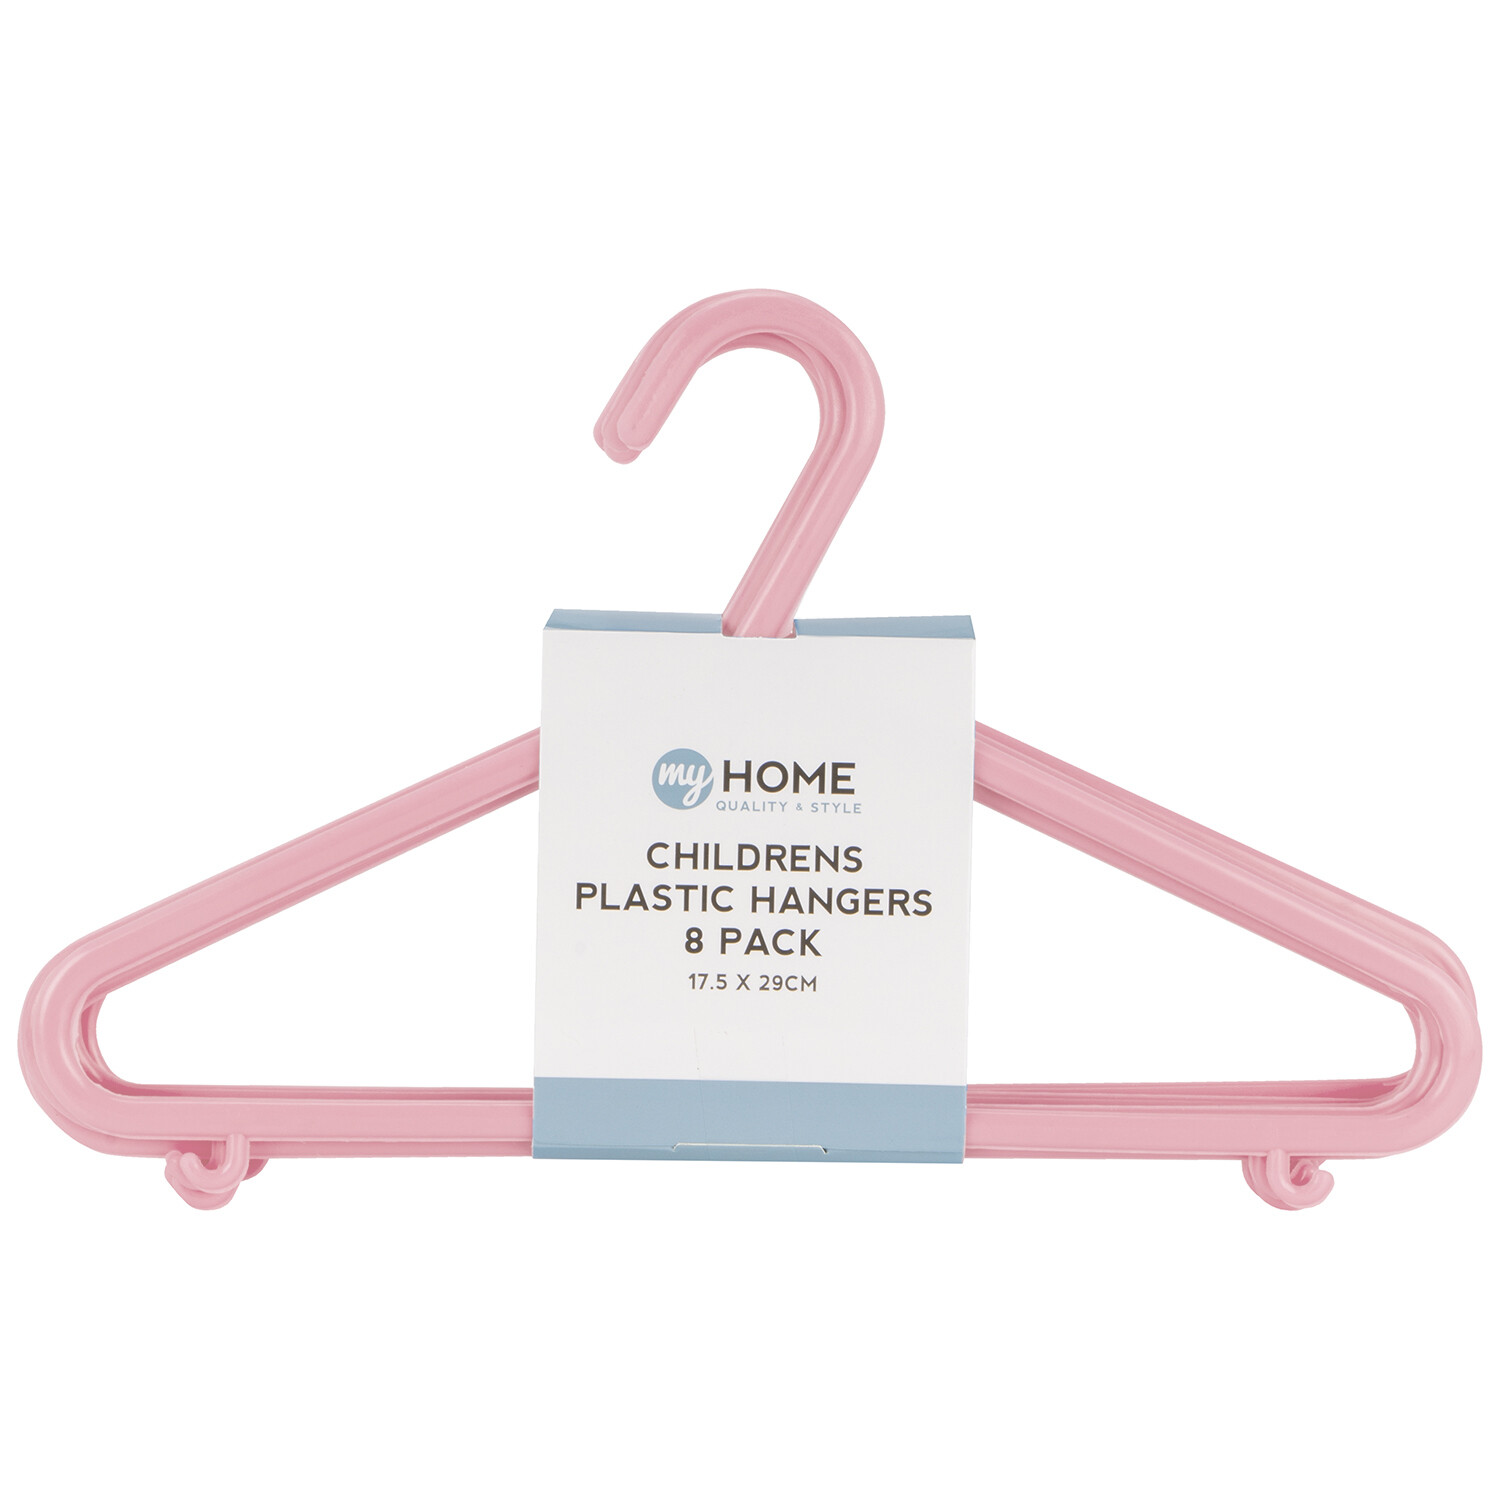 My Home Children's Plastic Clothes Hanger 8 Pack Image 2